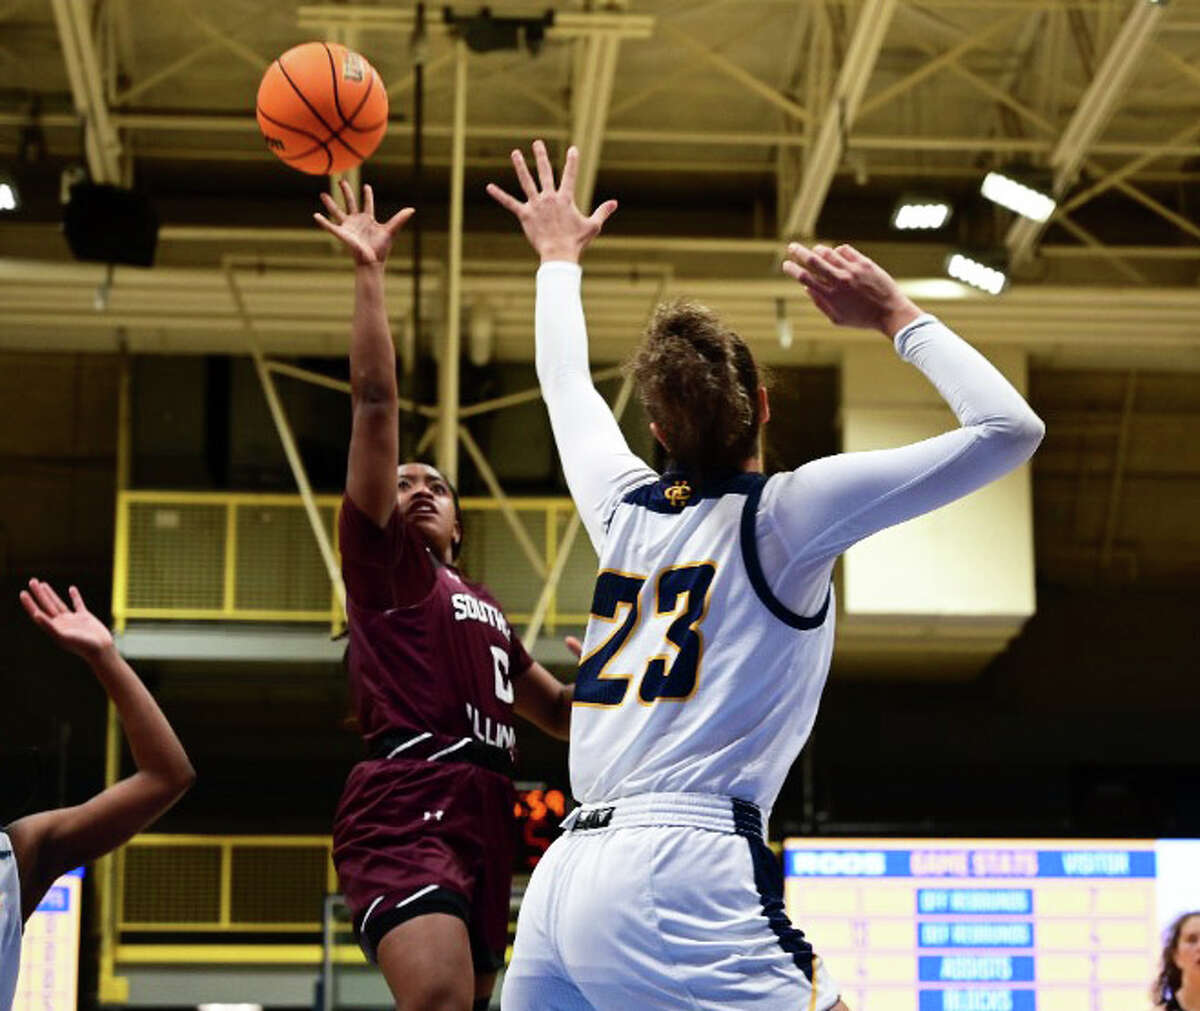 SIU's Quierra Love puts up a runner in the lane during a game earlier this season.